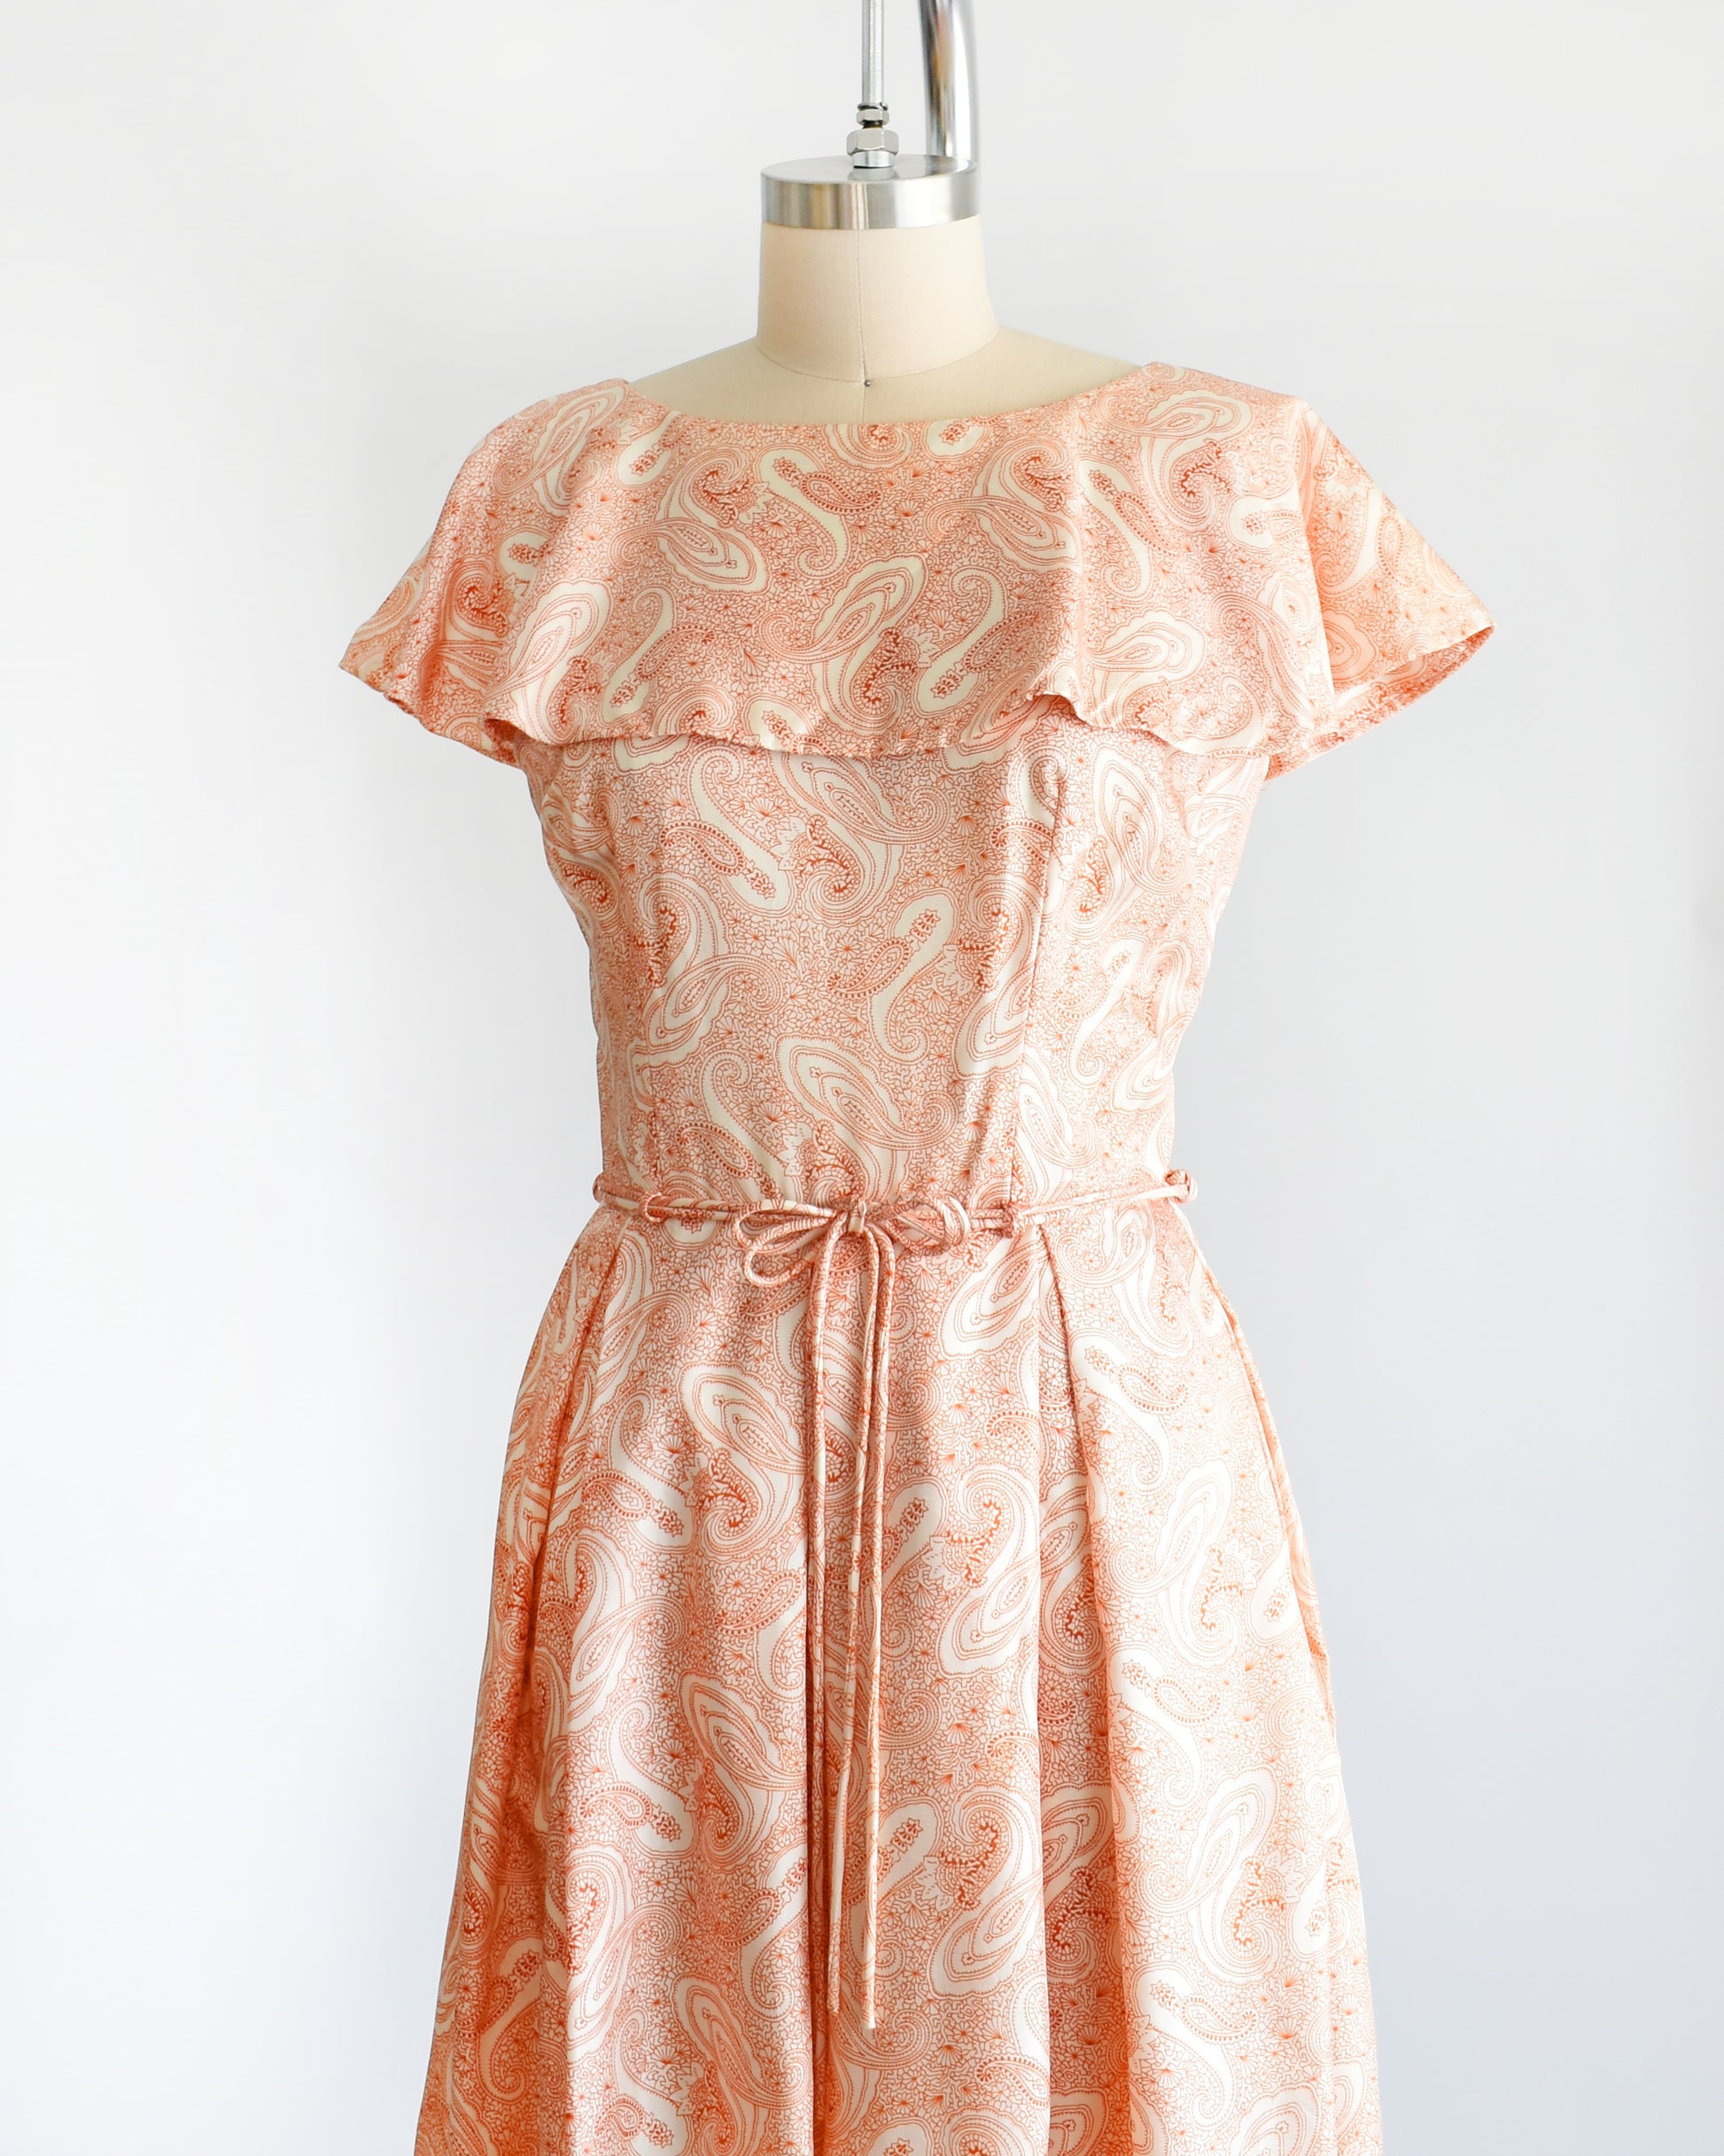 Side front view of a vintage 1960s dress that features an orange and white paisley print, a ruffled neckline, matching tie belt, and pleated skirt.